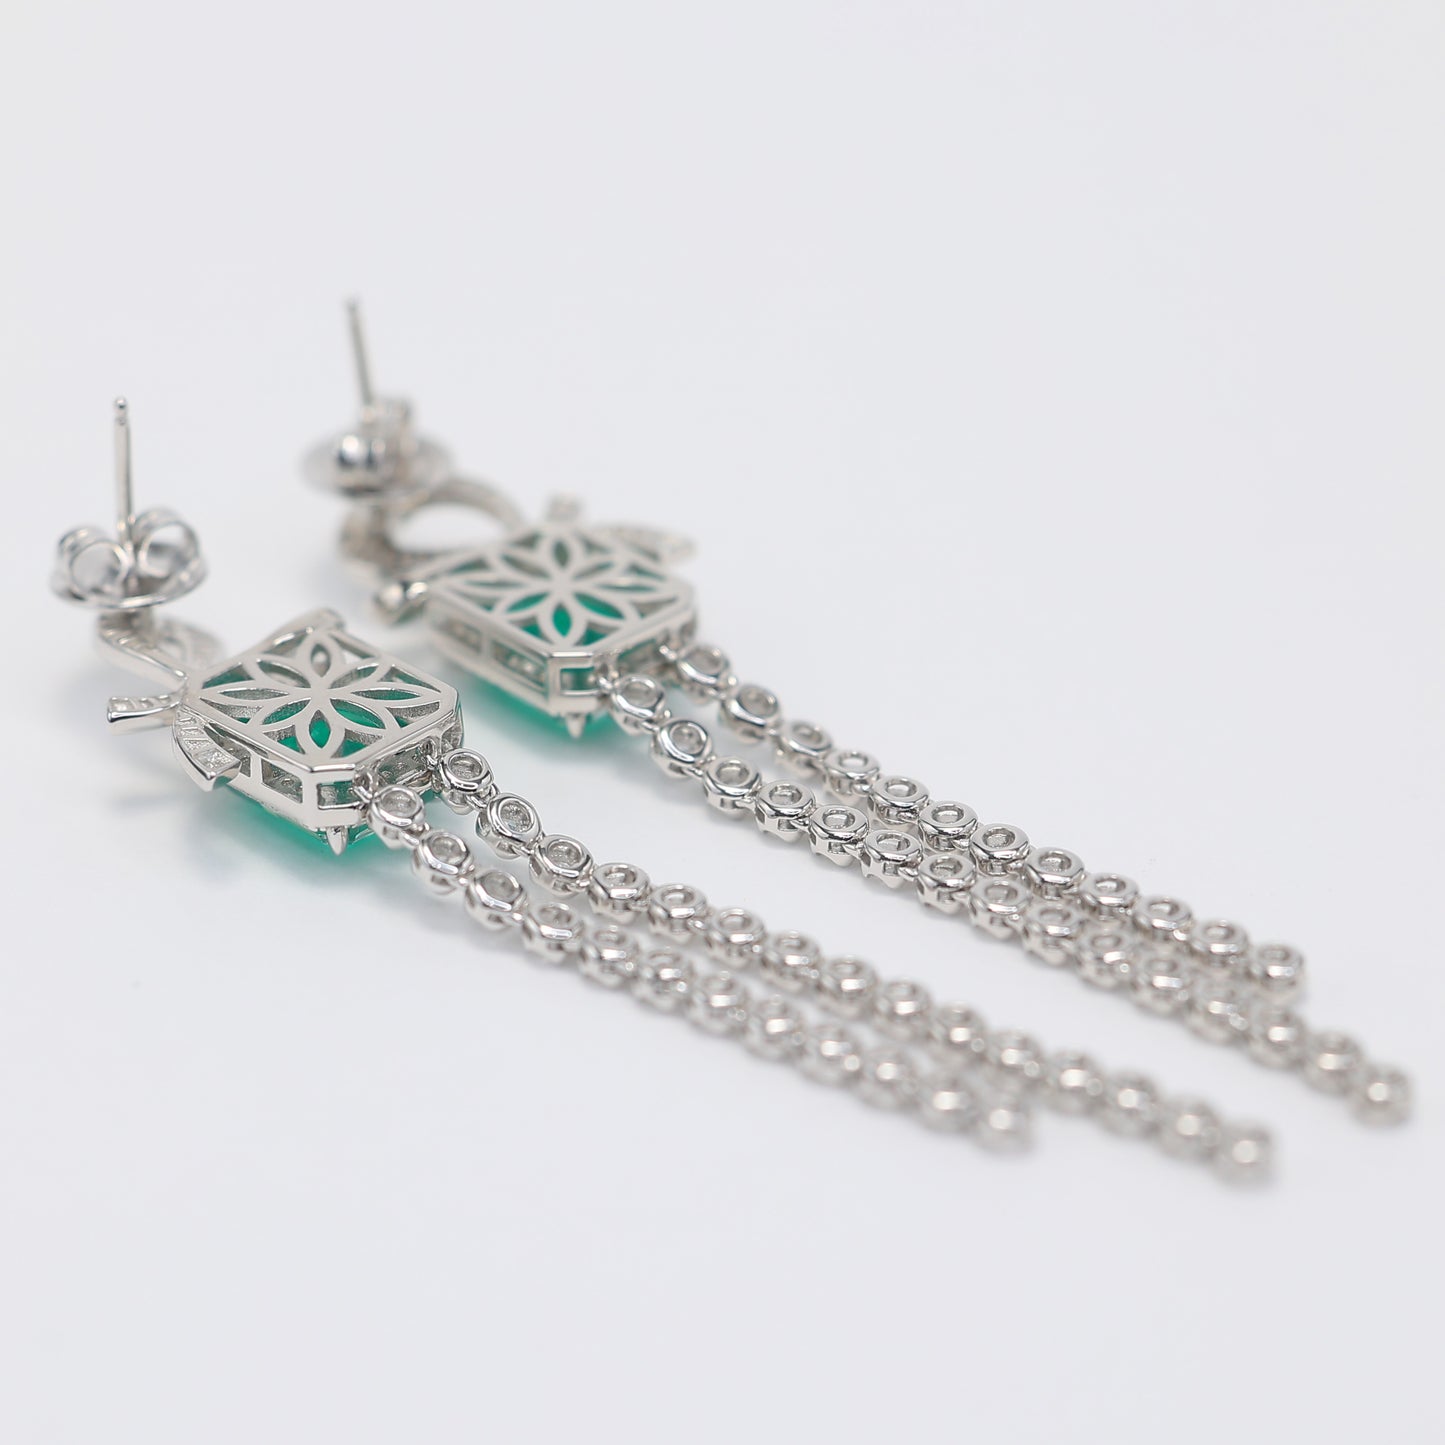 Micro-setting emerald color Lab created stones butterfly bubble chain earrings, sterling silver